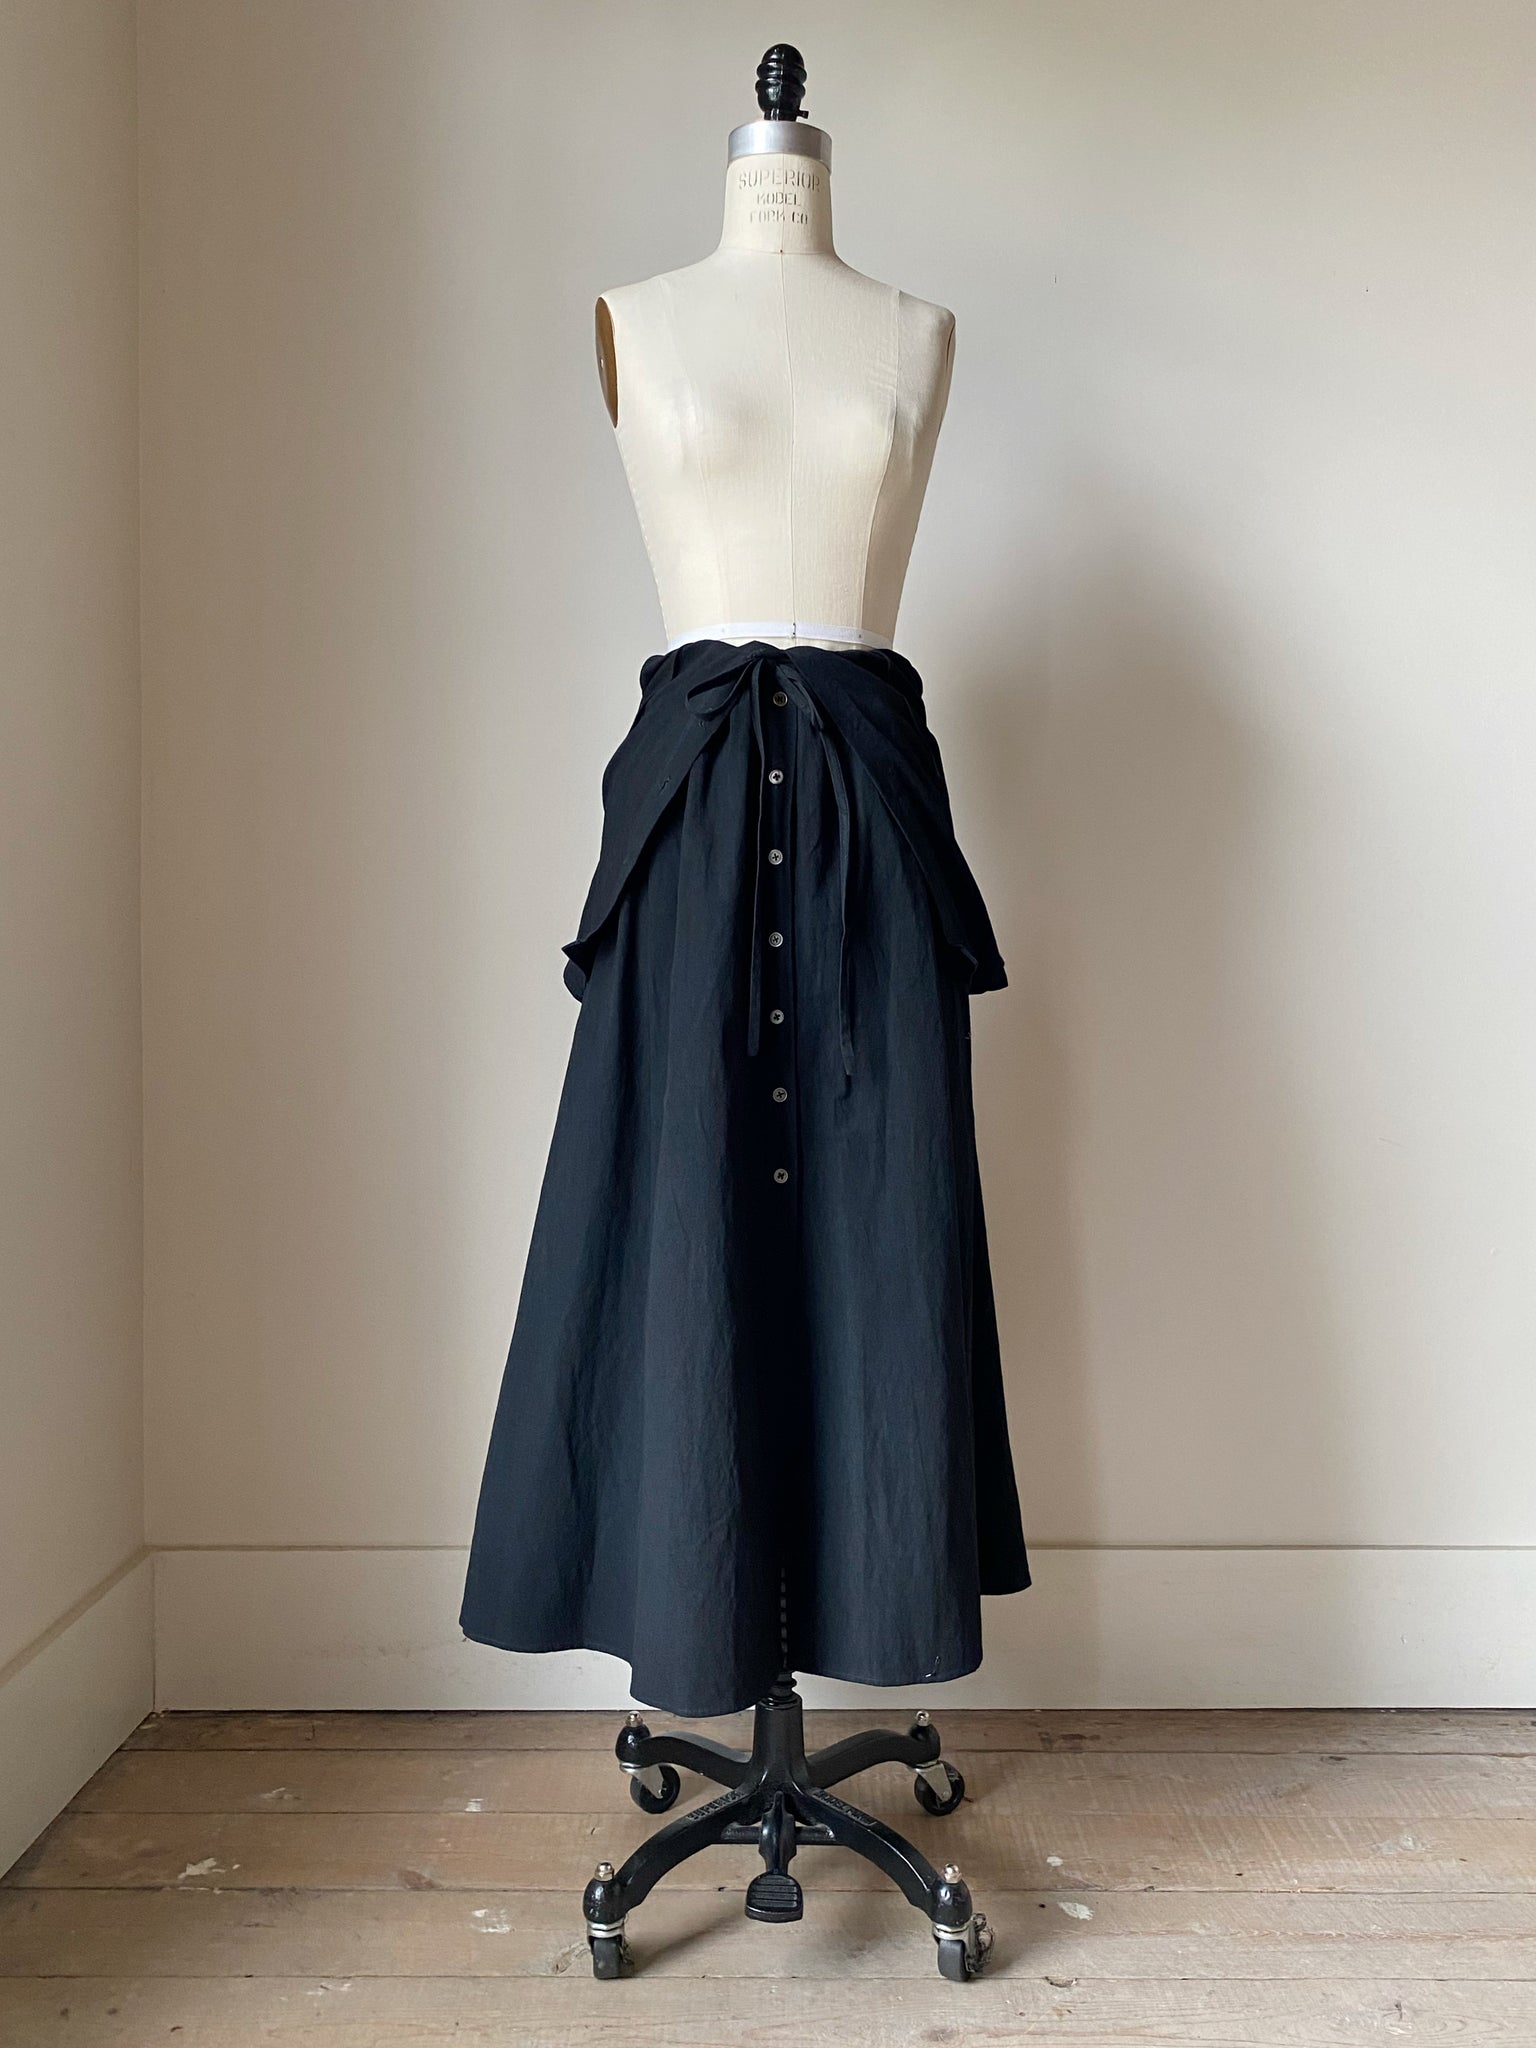 lillian worker dress with collapsible bodice into skirt